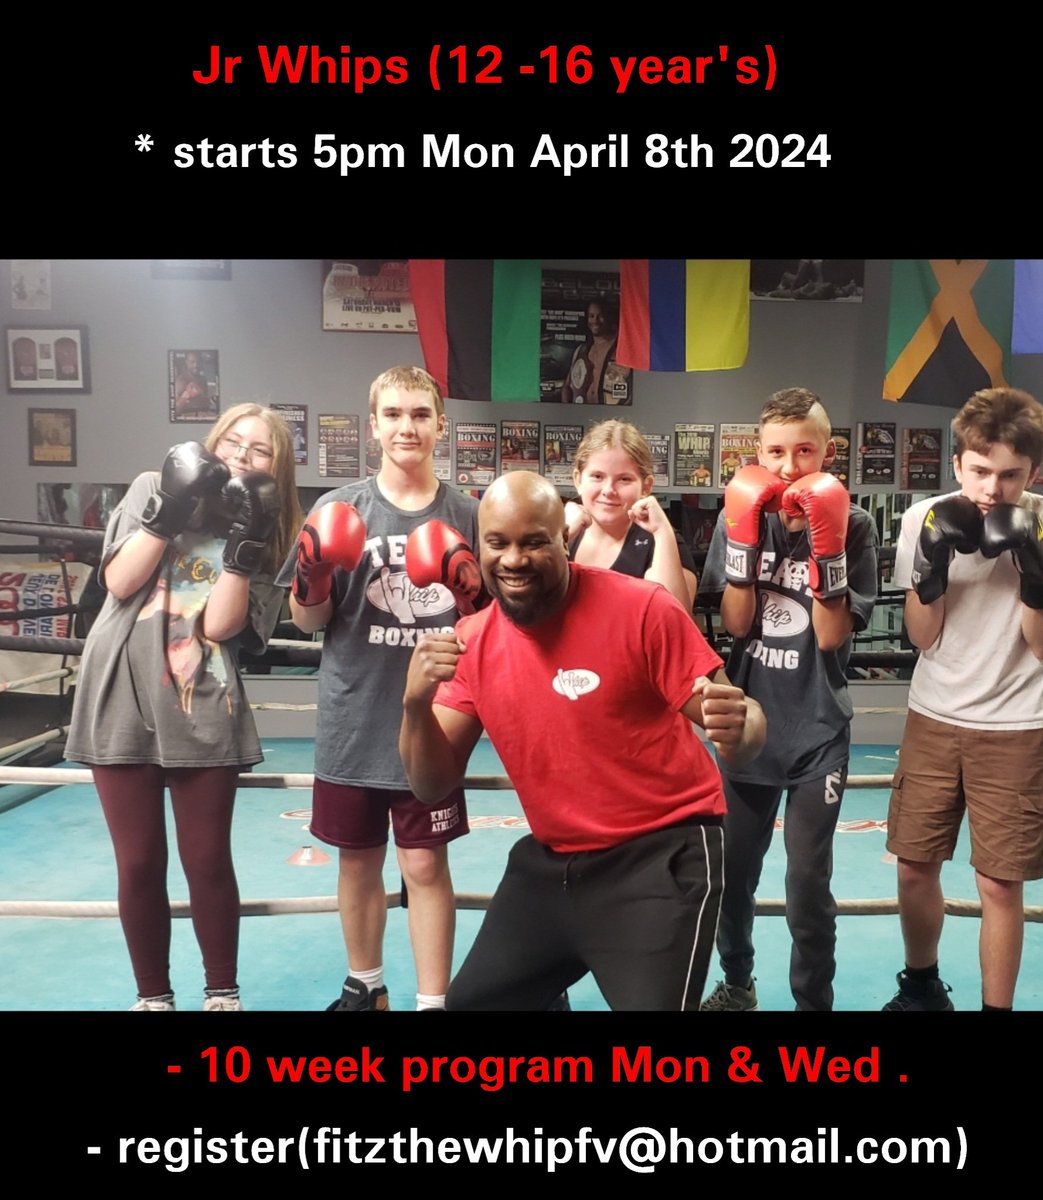 Next Jr Whips (12 - 16 year's) starts Mon April 8th 2024 . Classes Mon & Wed 5pm Contact(fitzthewhipfv@hotmail.com) #inspiringhope #confidence